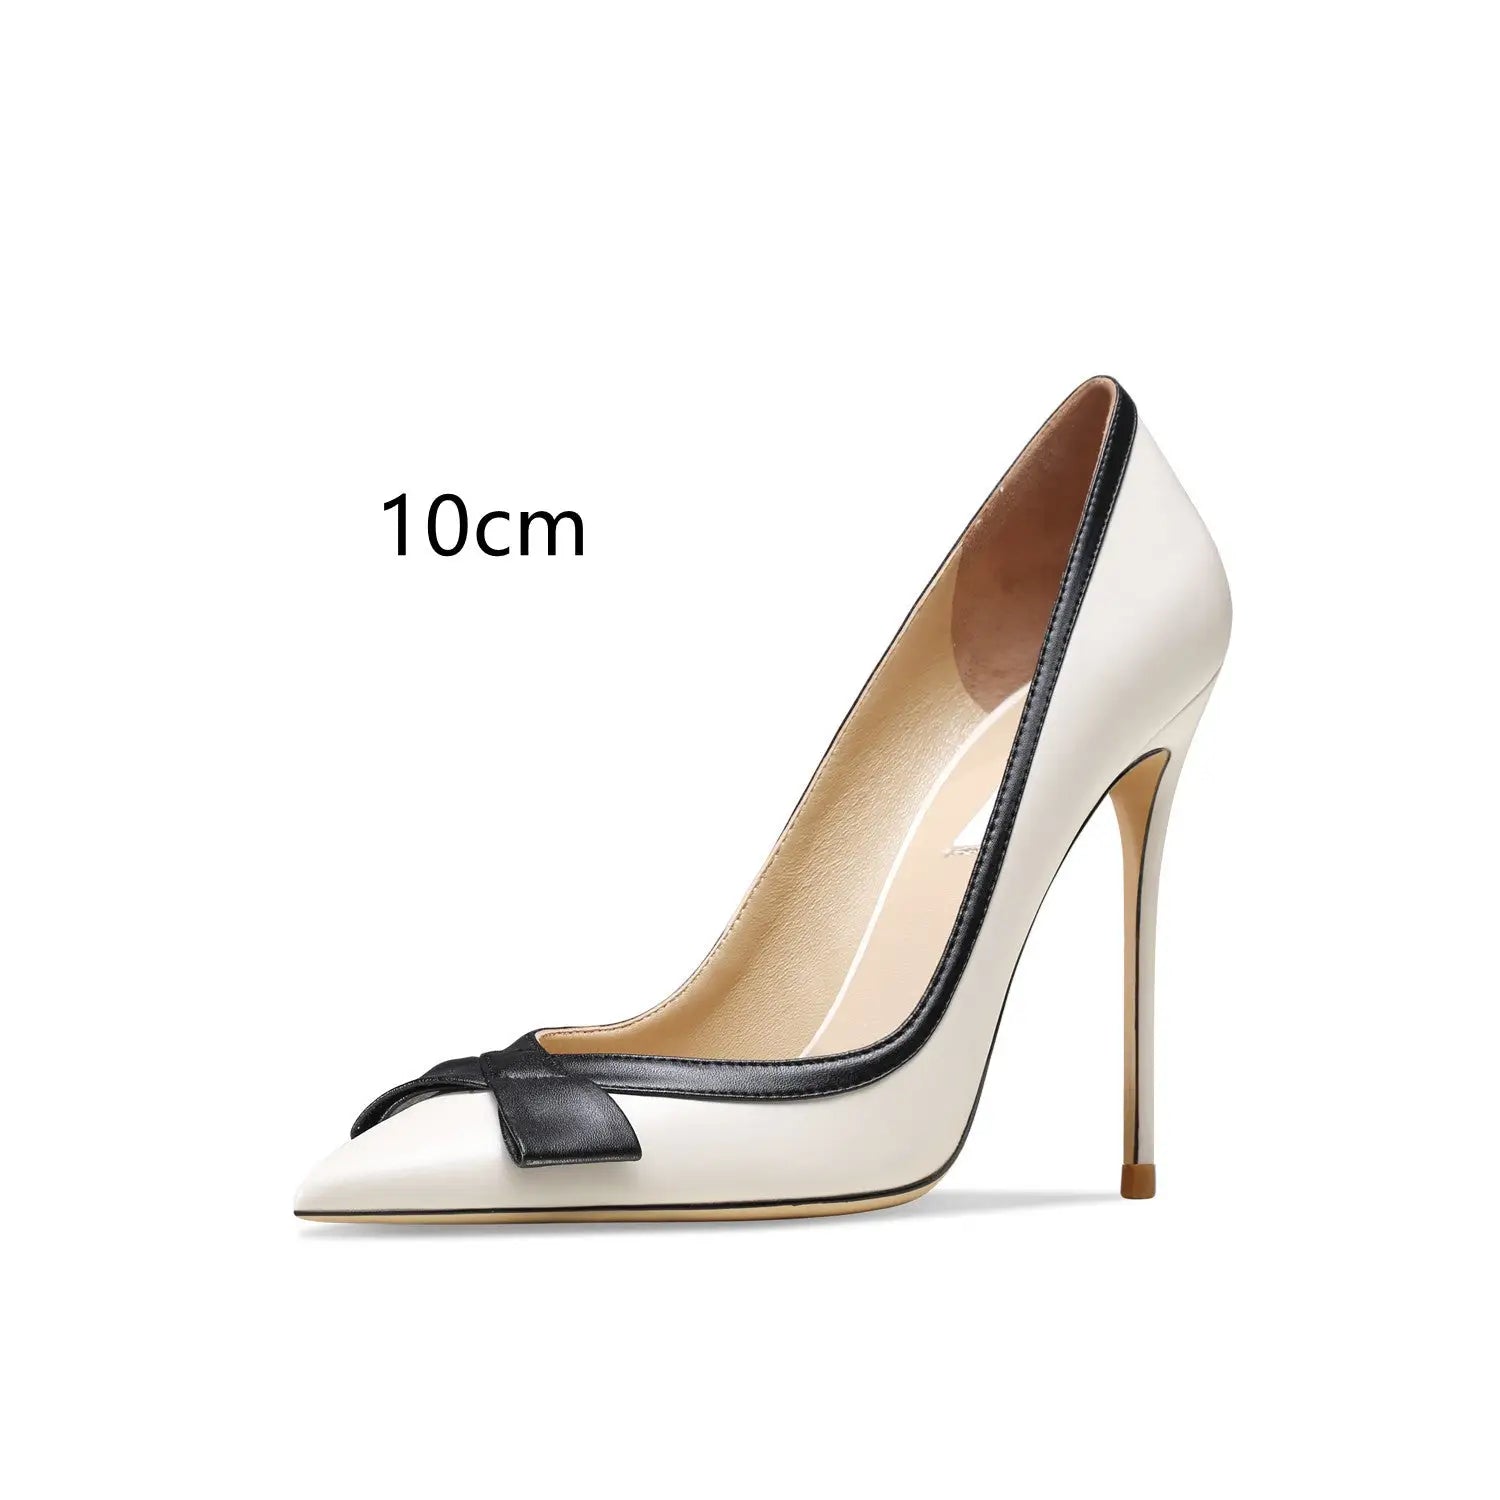 Perfect leather stiletto high heels - apricot / surface 10cm / 33 - pumps